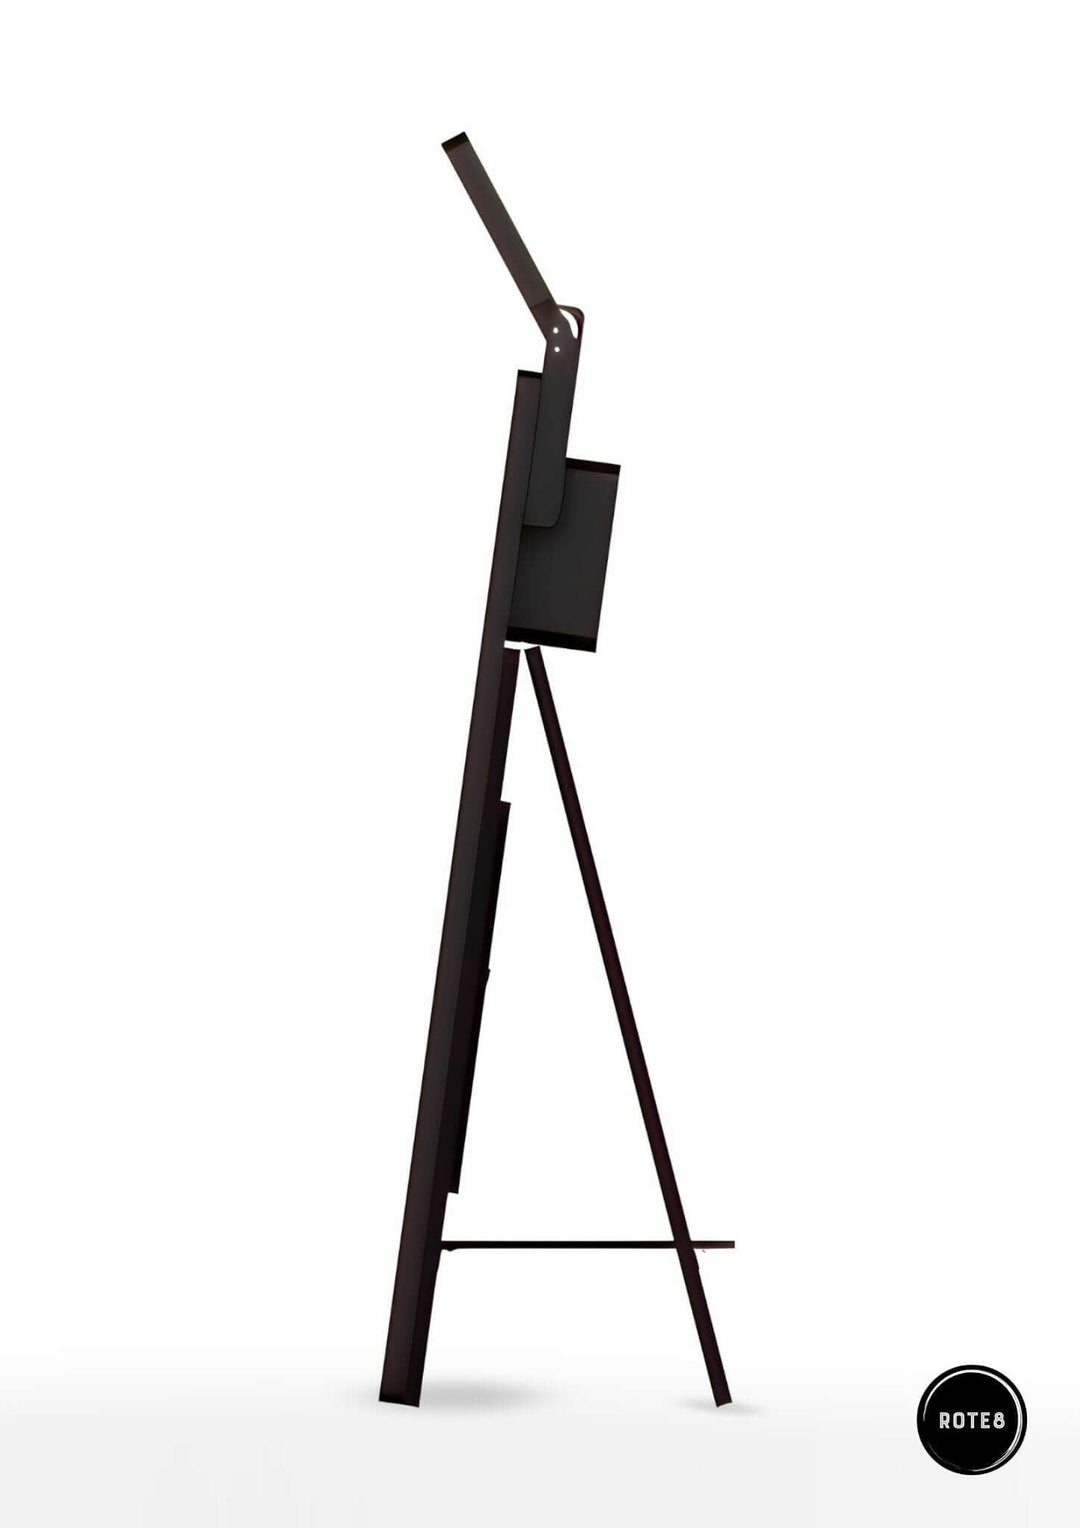 Black and white image of a tall mirror photo booth stand. High-tech mirror photo booth with advanced photo editing software interface